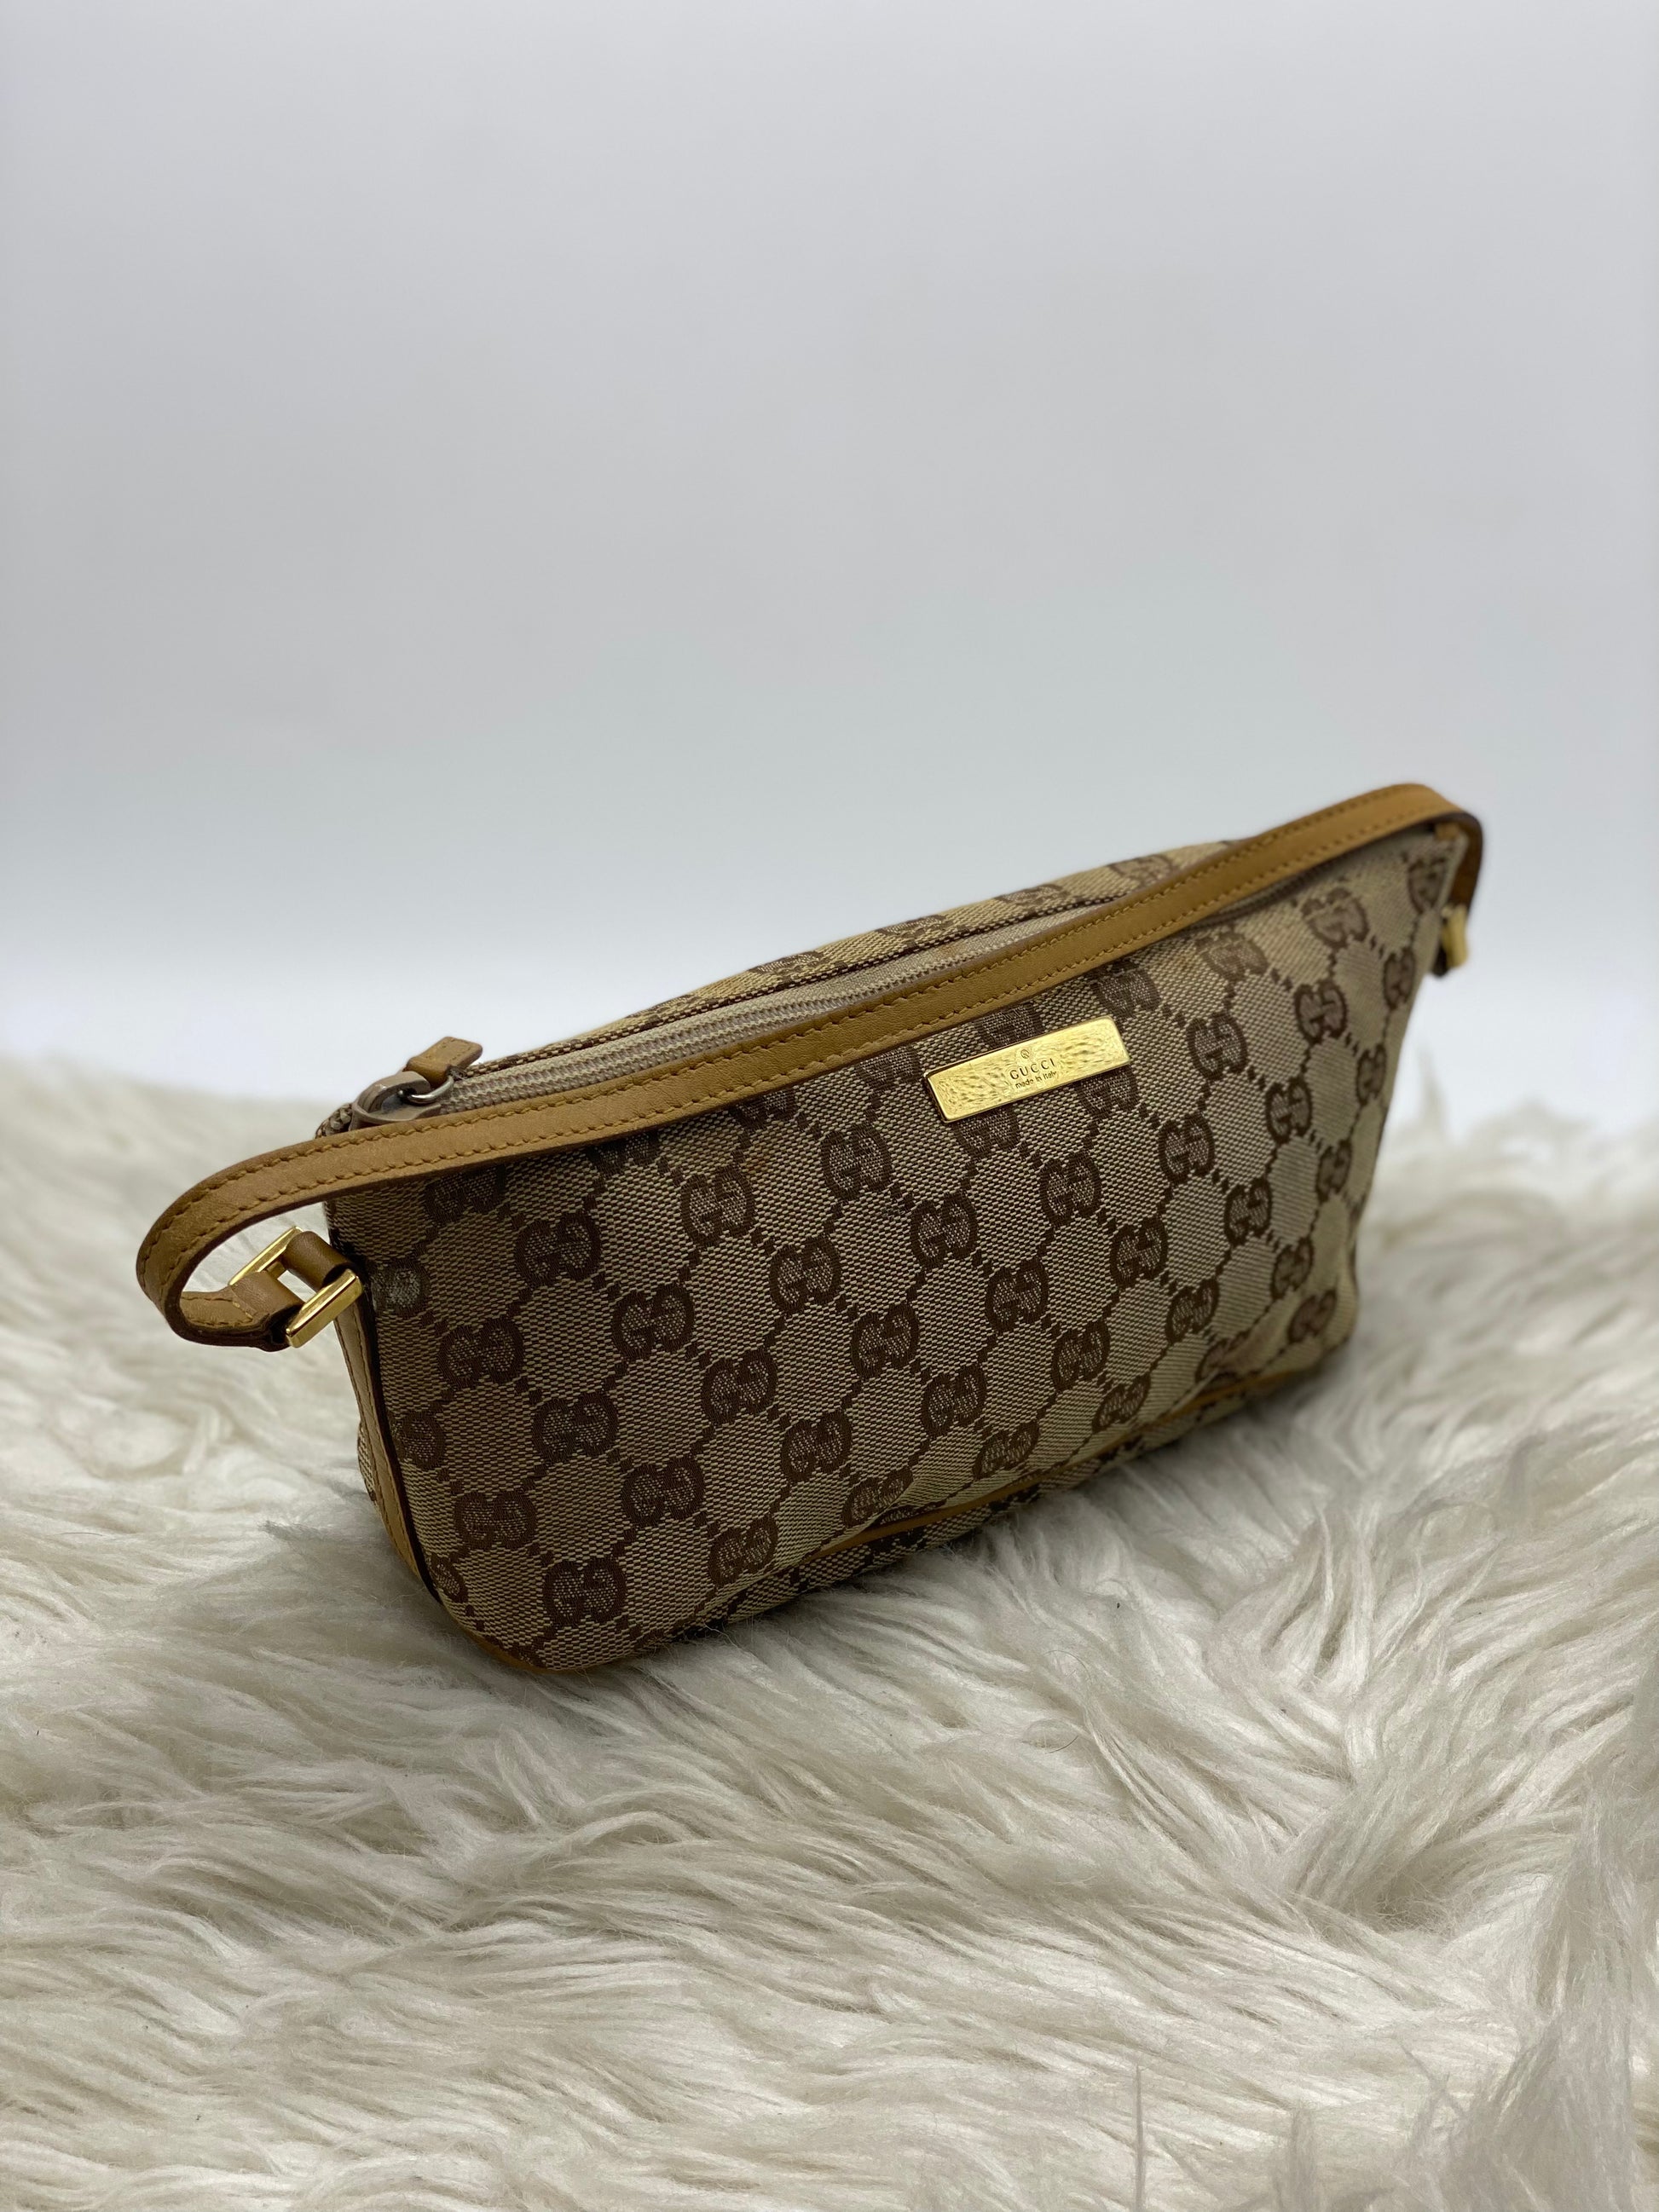 Gucci GG Canvas and Leather Boat Pochette Bag Beige/Brown